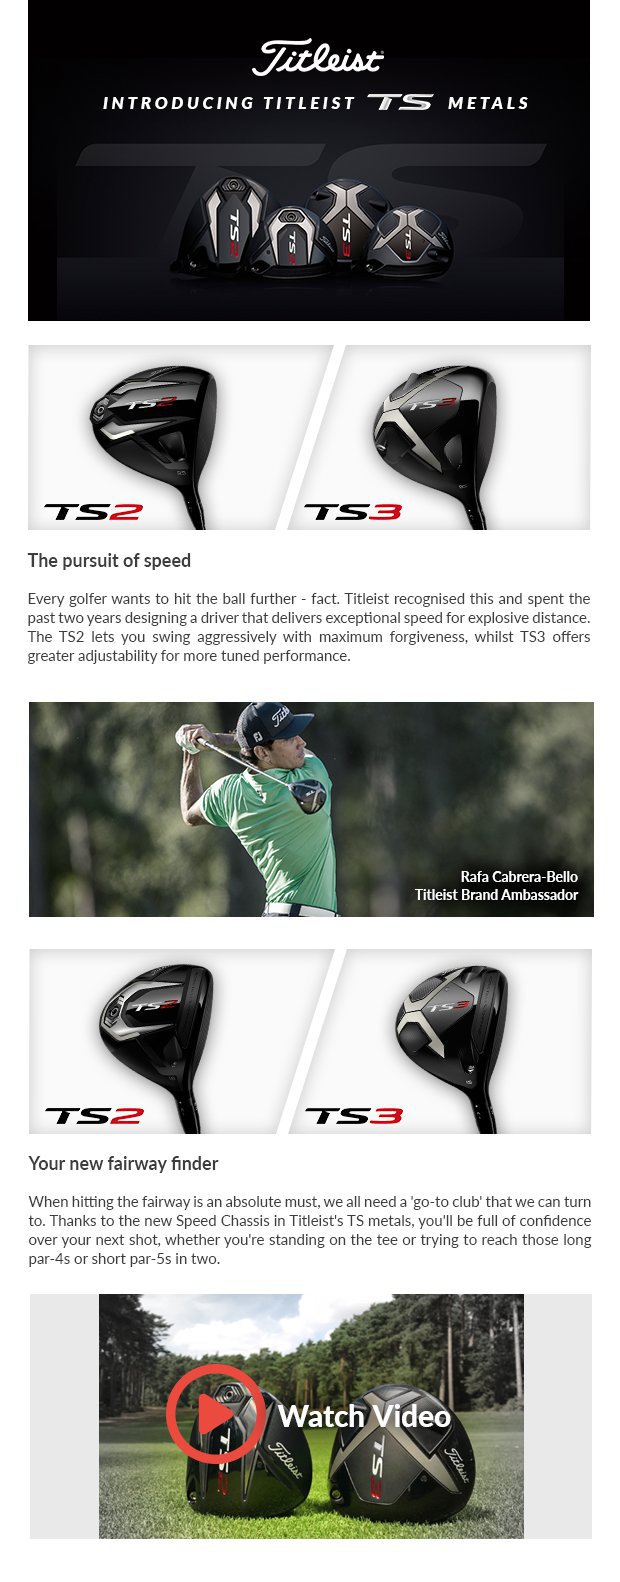 Introducing Titleist TS MetalsThe pursuit of speed Every golfer wants to hit the ball further - fact. Titleist recognised this and spent the past two years designing a driver that delivers exceptional speed for explosive distance. The TS2 lets you swing aggressively with maximum forgiveness, whilst TS3 offersgreater adjustability for more tuned performance.